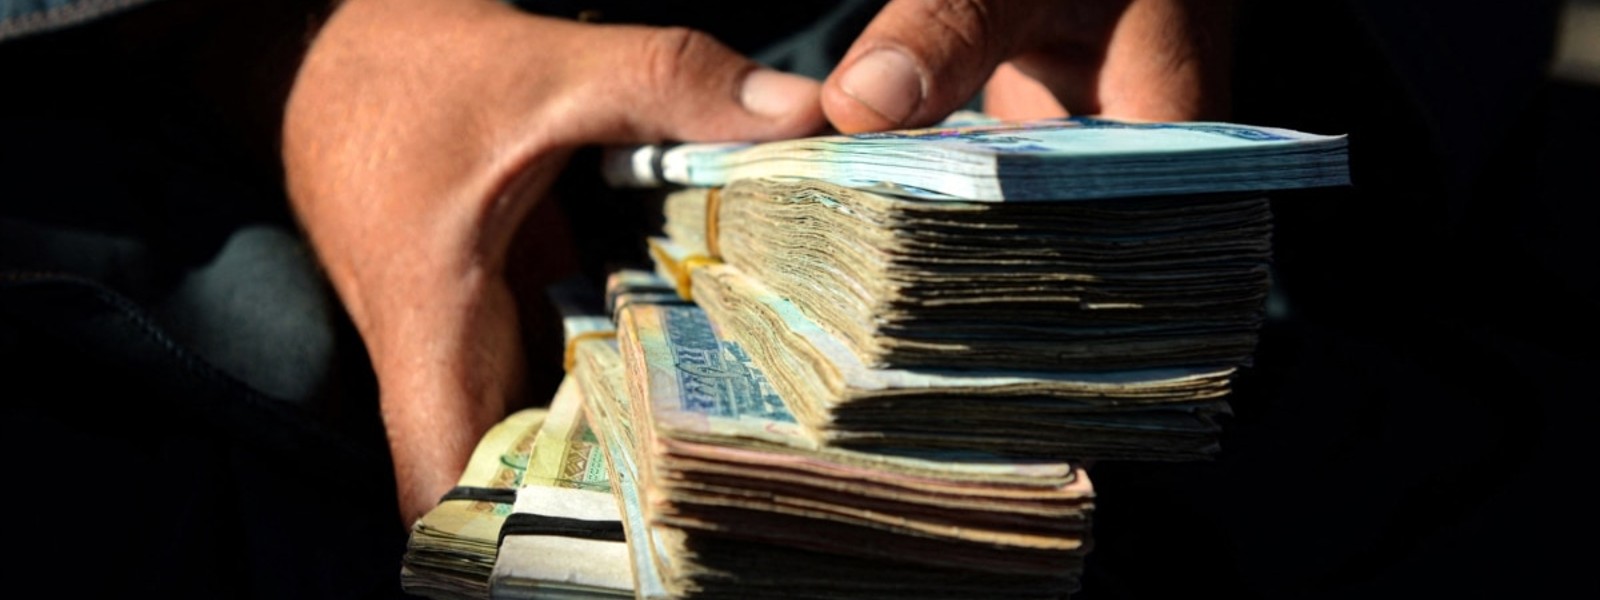 Taliban bans the use of foreign currency across Afghanistan